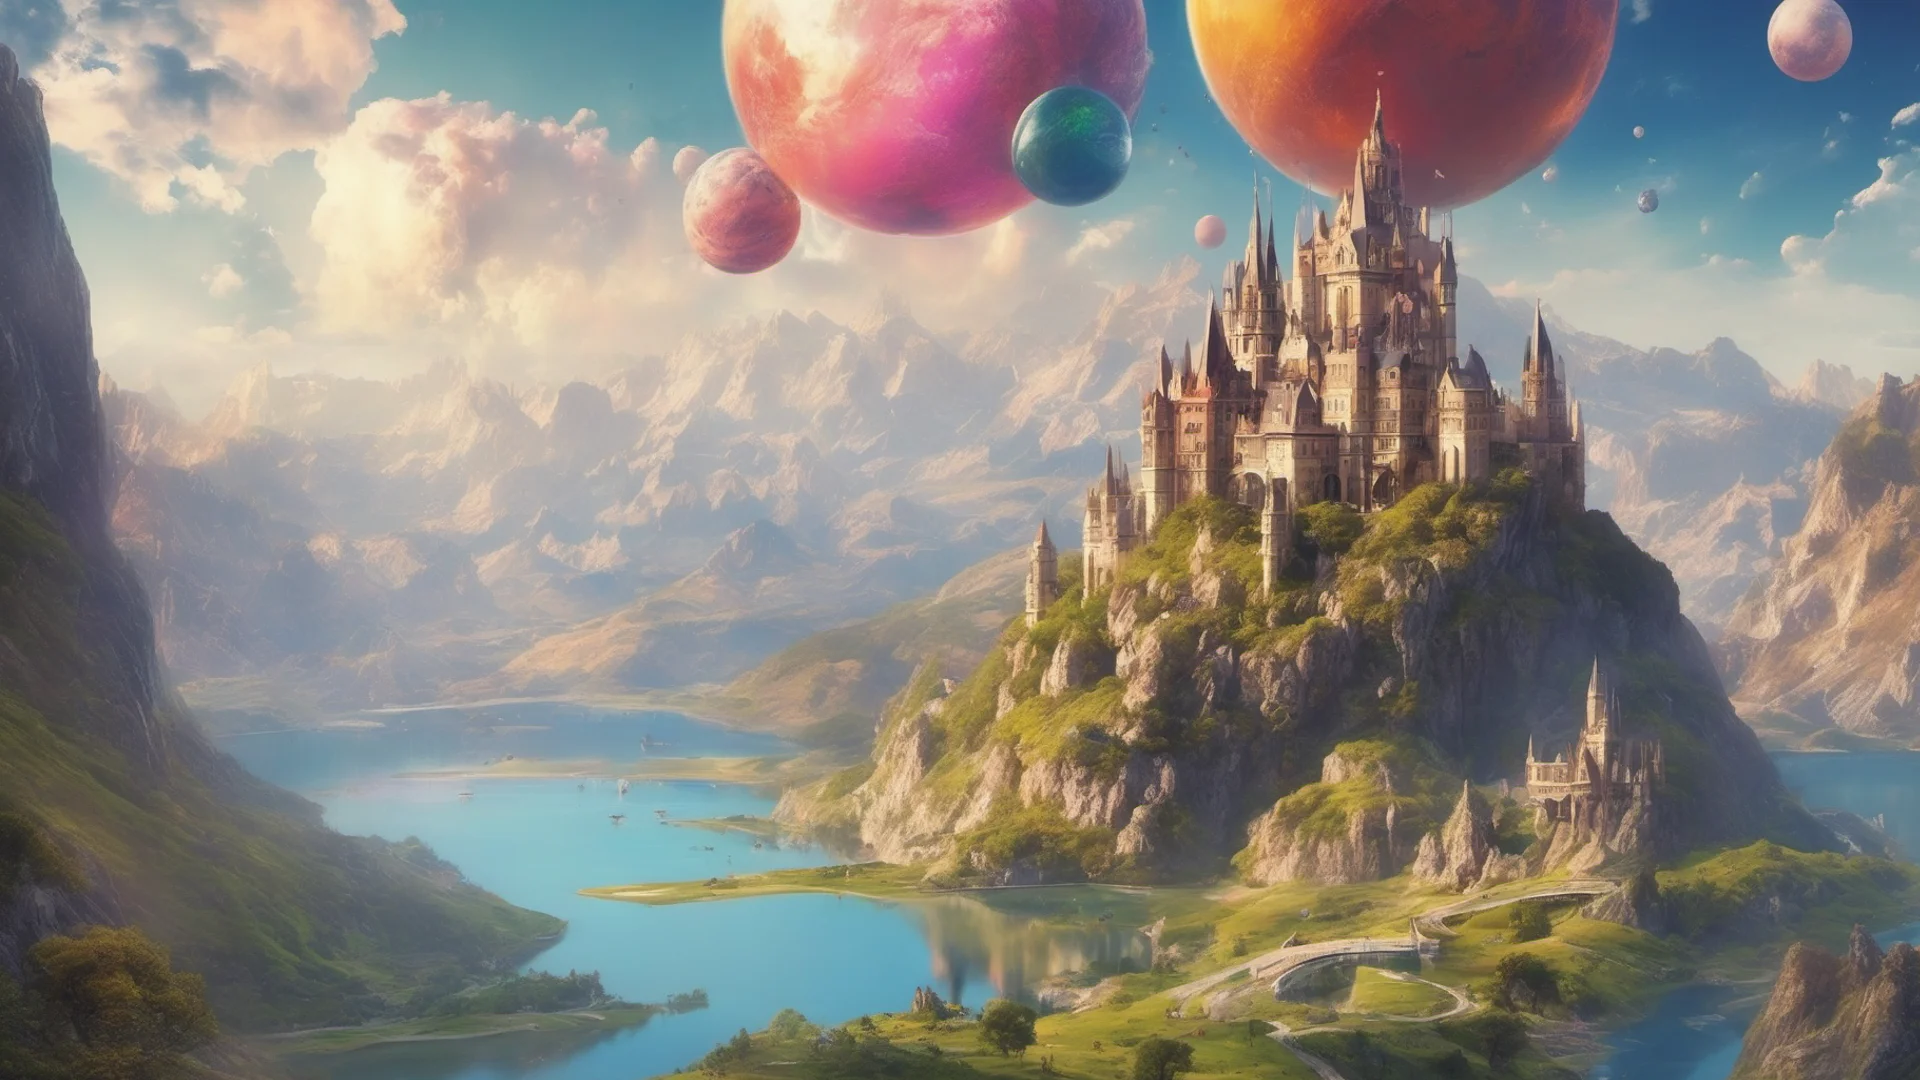 aibeautiful environment castle on mountains with lakes colorful planets above small flying airships confident engaging wow artstation art 3 wide